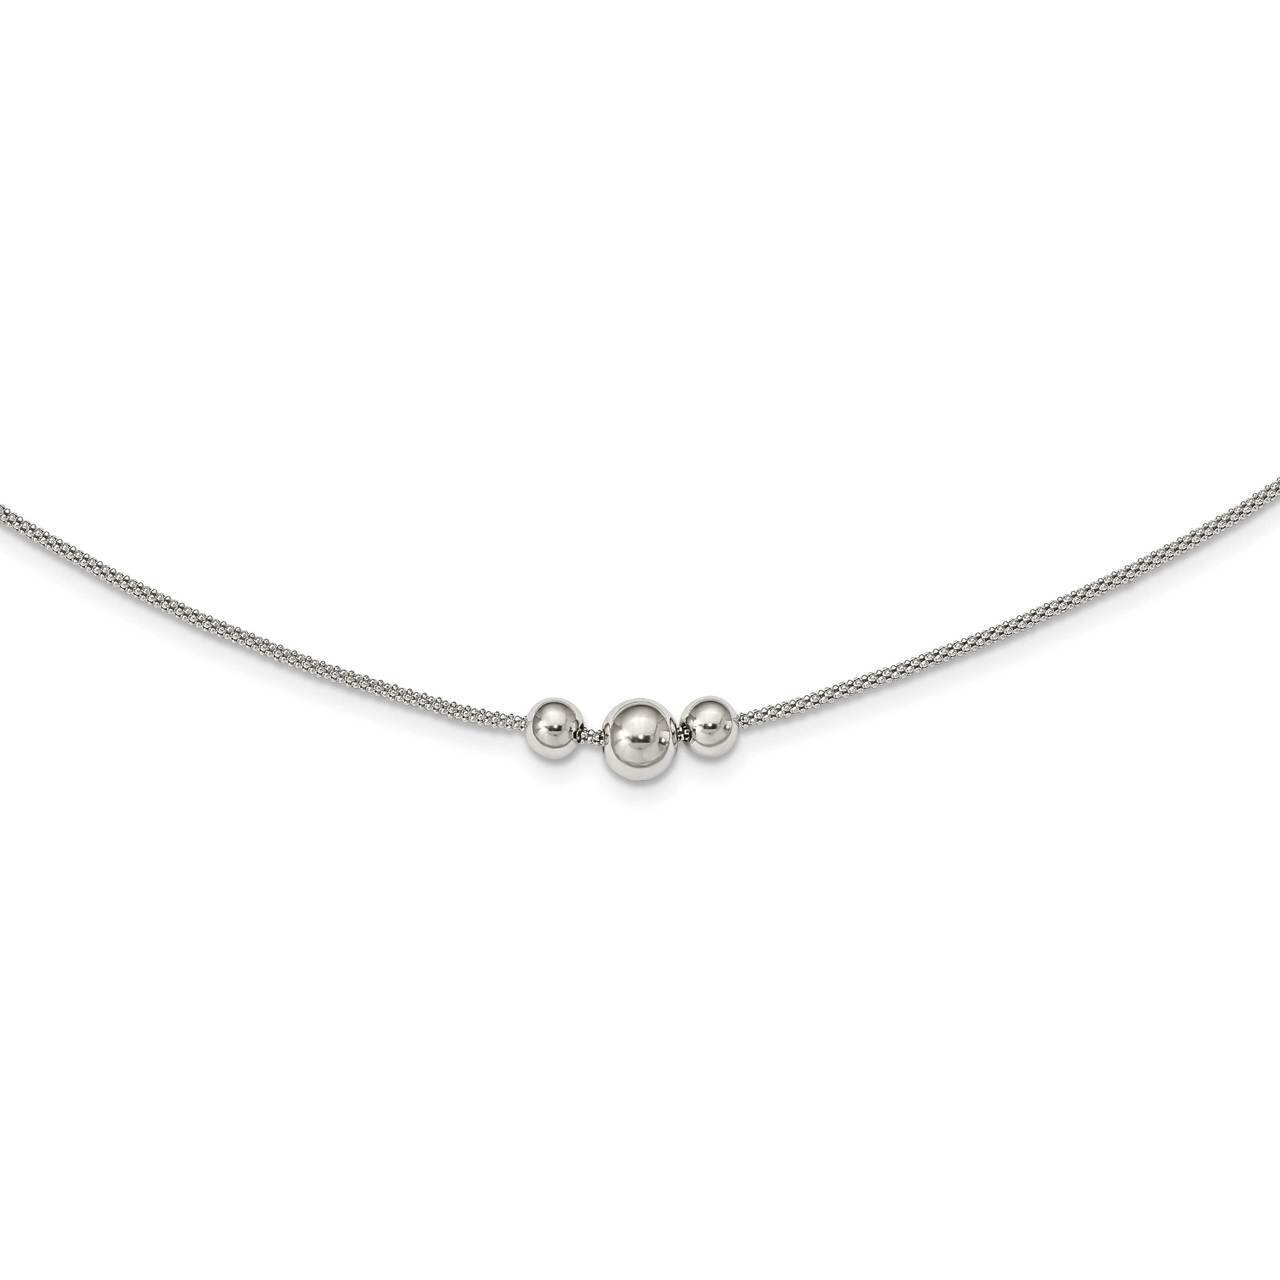 Bead Fancy Link Necklace Sterling Silver Polished QG5576-16